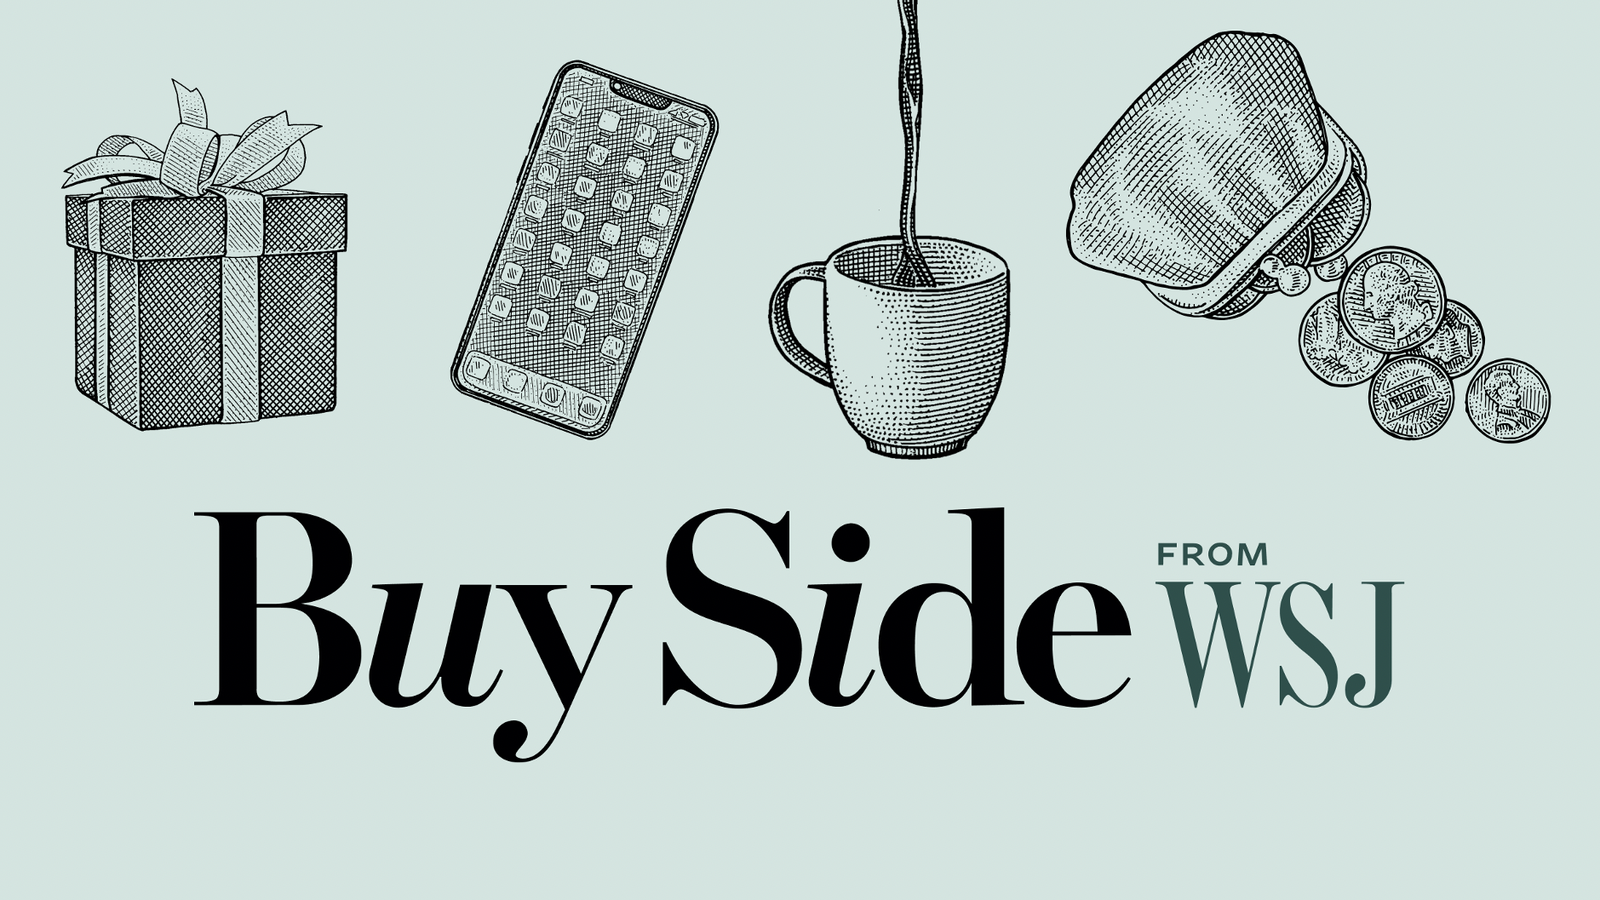 The Wall Street Journal launches BUY SIDE FROM WSJ, a new and